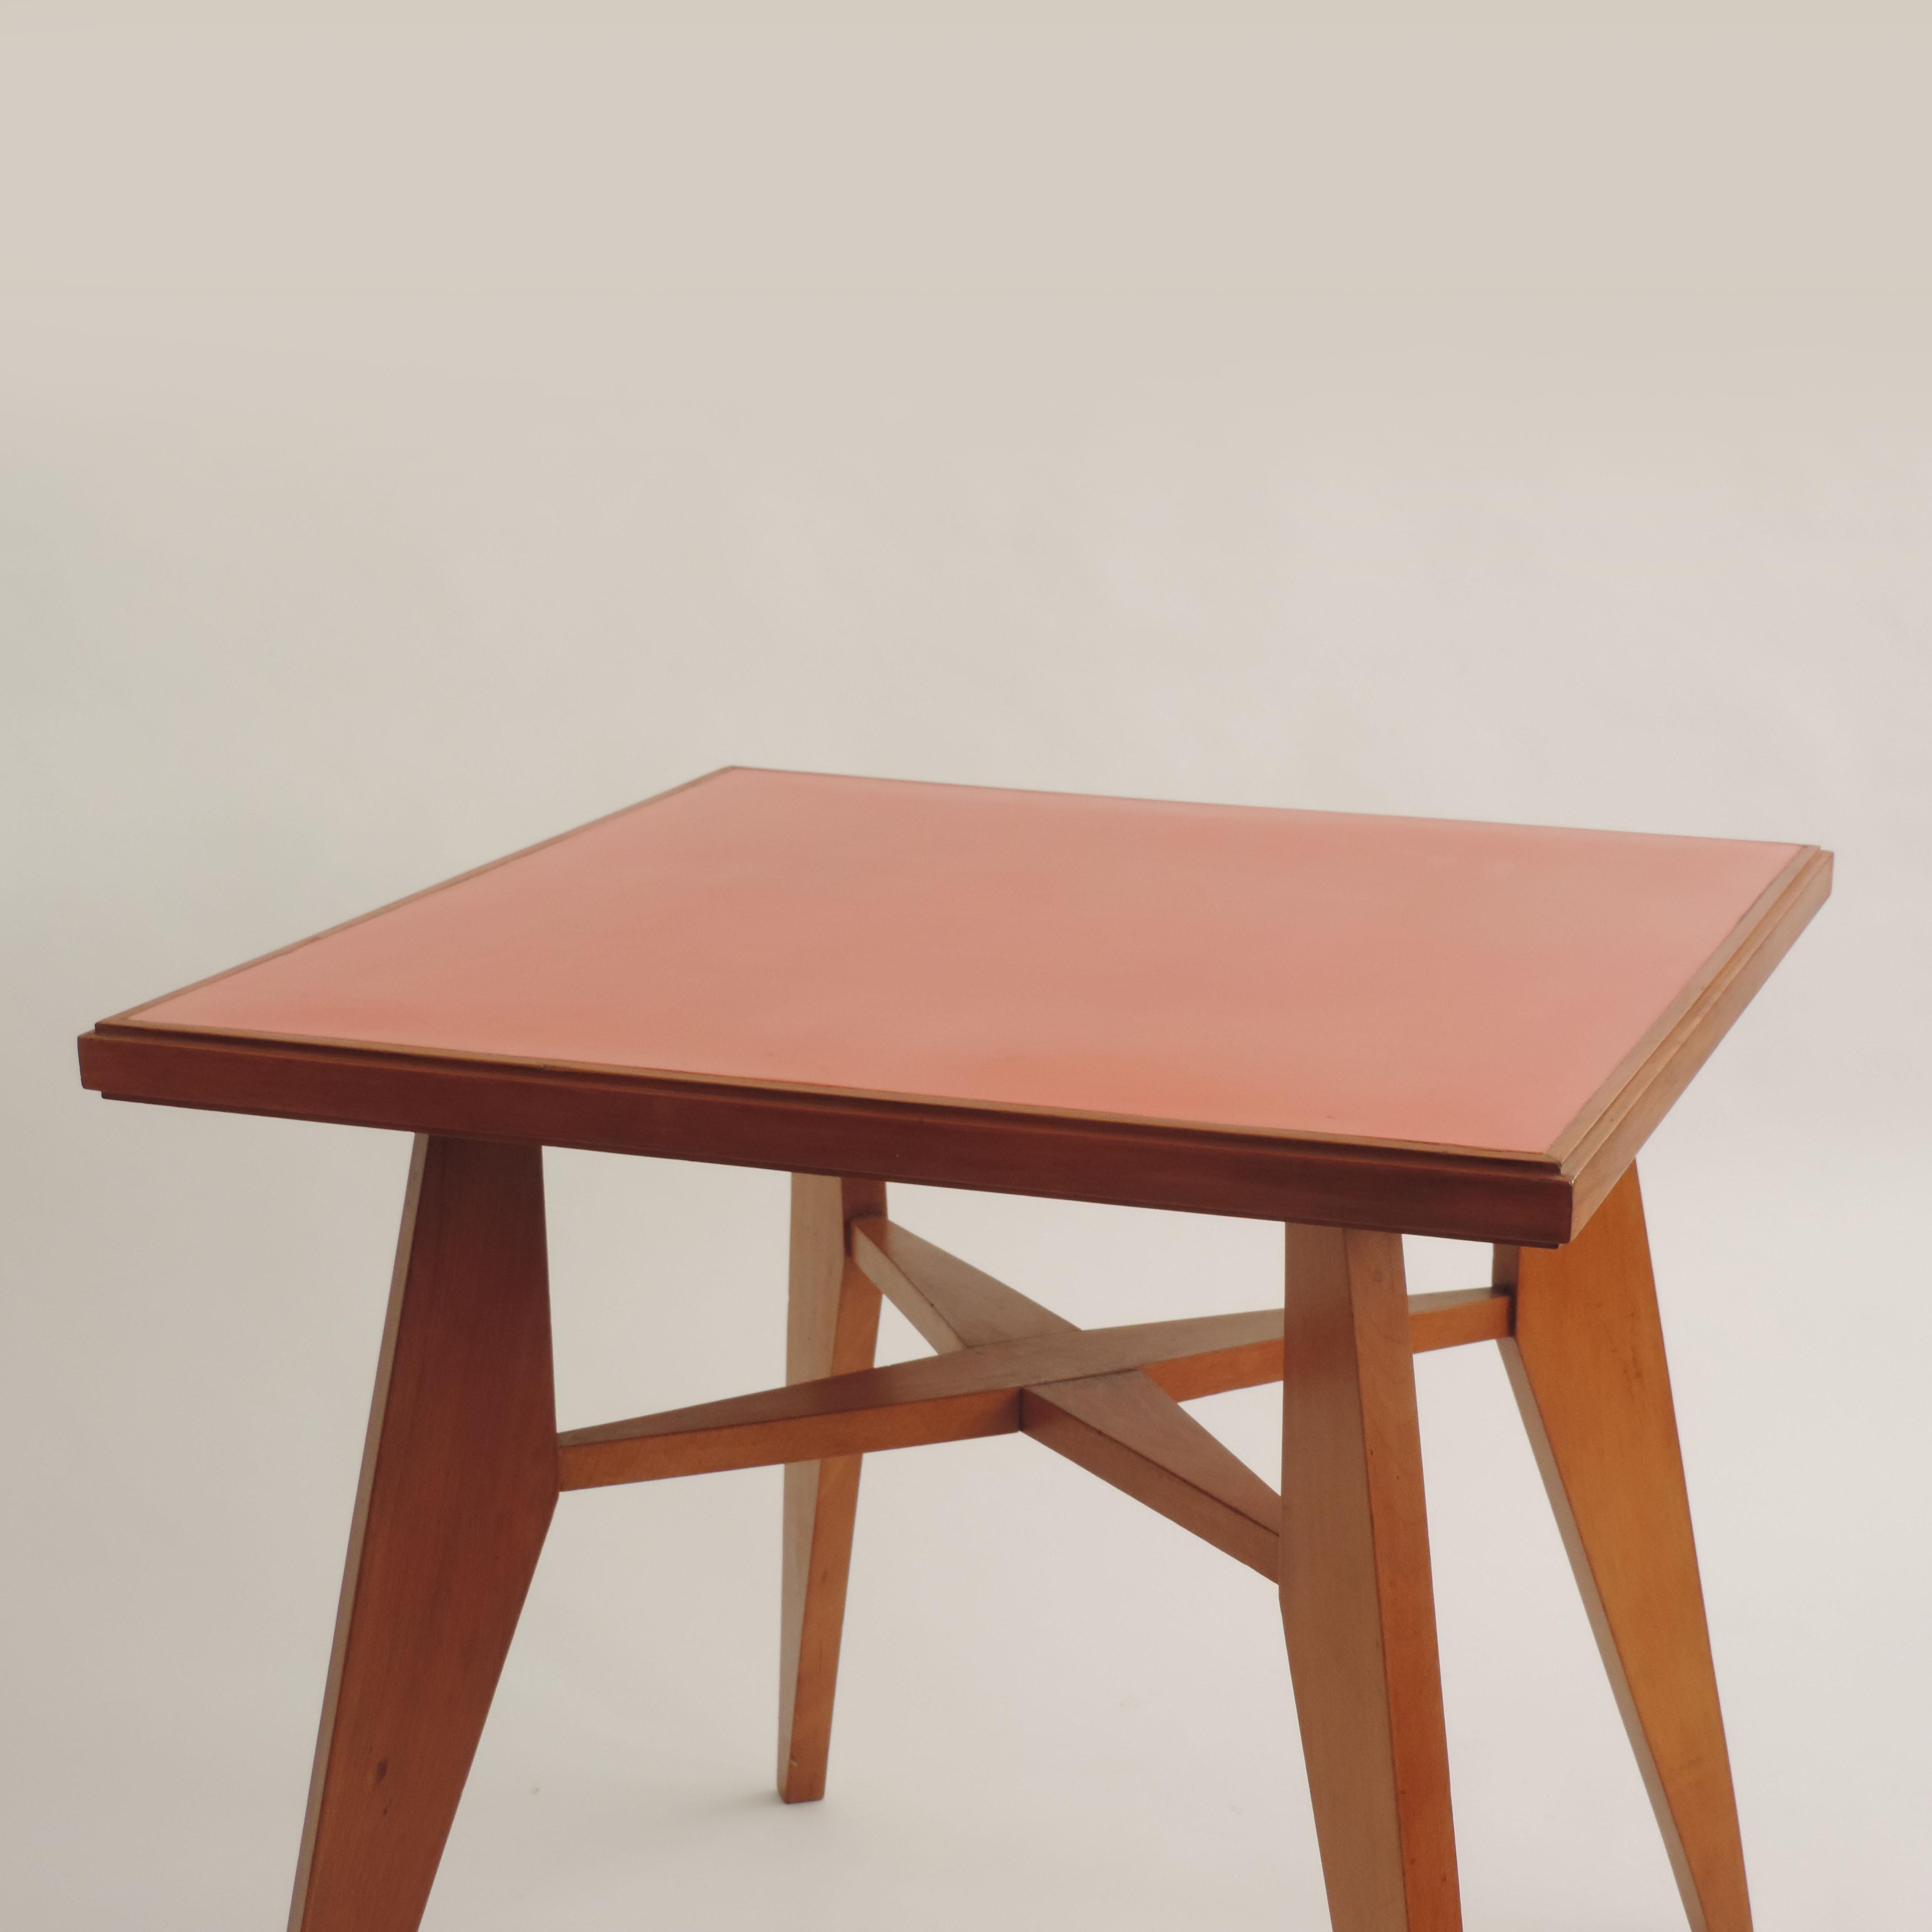 Mid-20th Century Architectural Square Dining Table with Red Top, Italy, 1950s